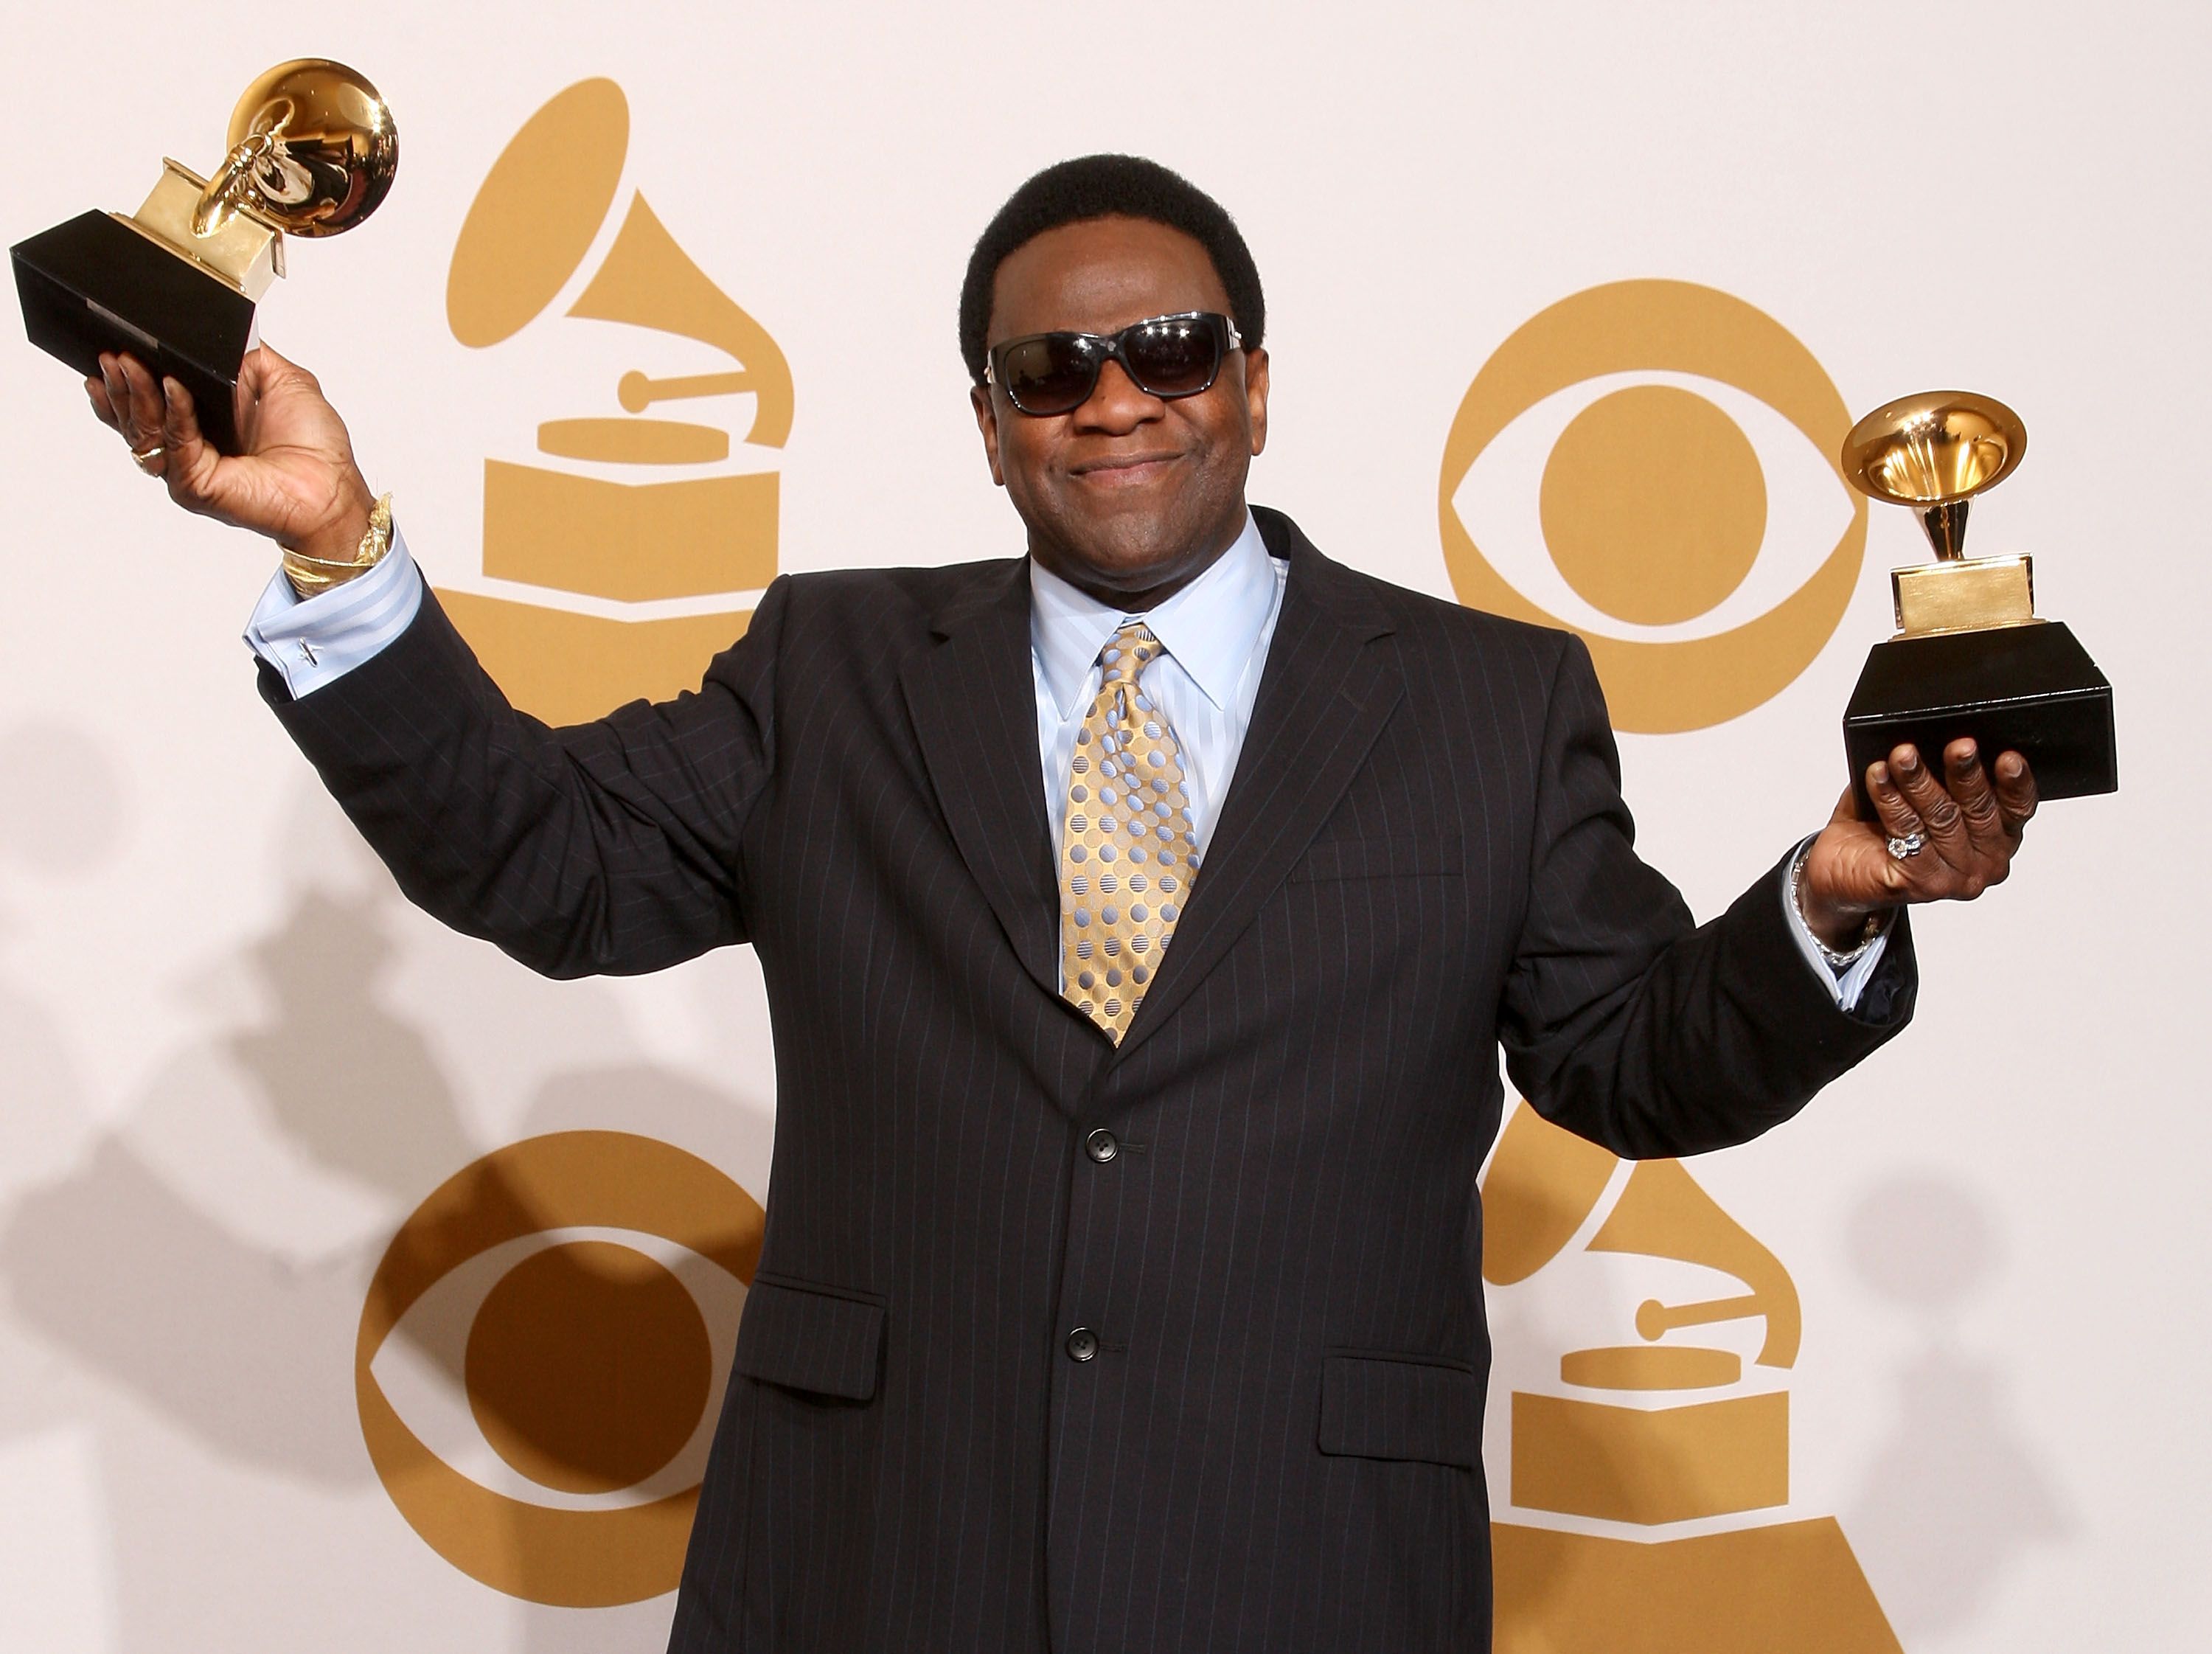 Al Green during the 51st Annual Grammy Awards held at the Staples Center on February 8, 2009 in Los Angeles, California. | Source: Getty Images